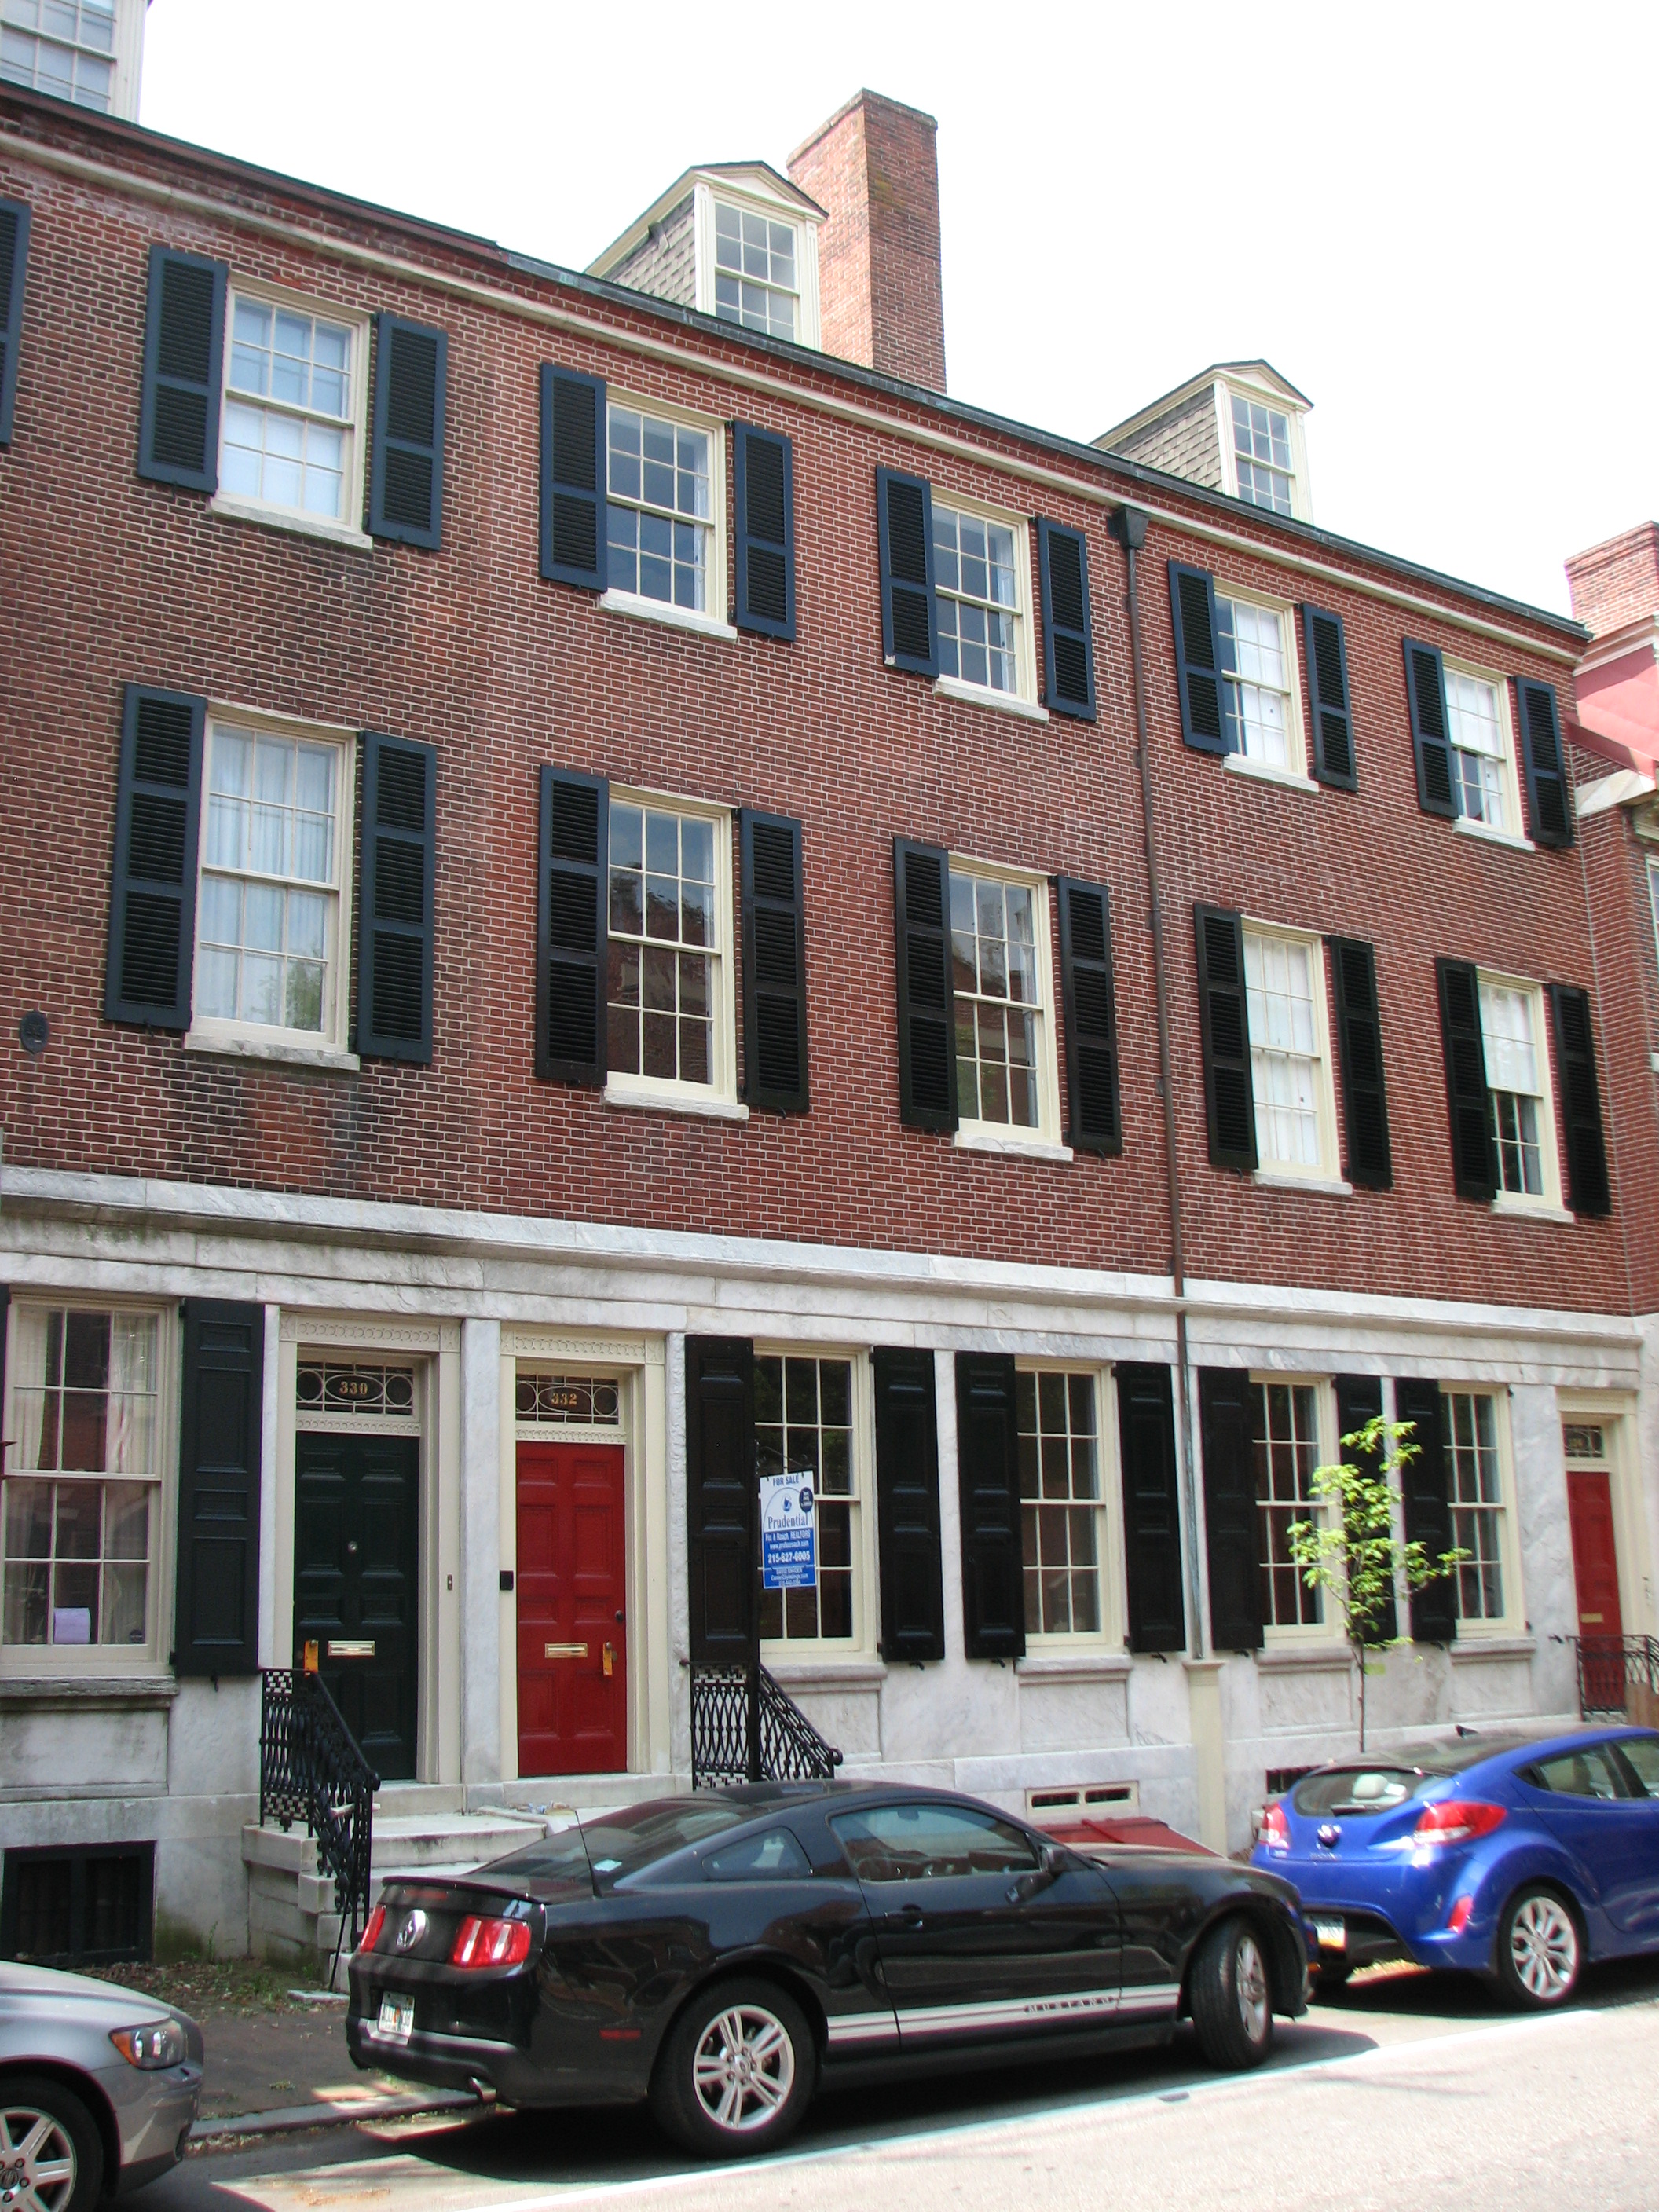 Girard Row was built by mason William Struthers from 1831 to 1837.